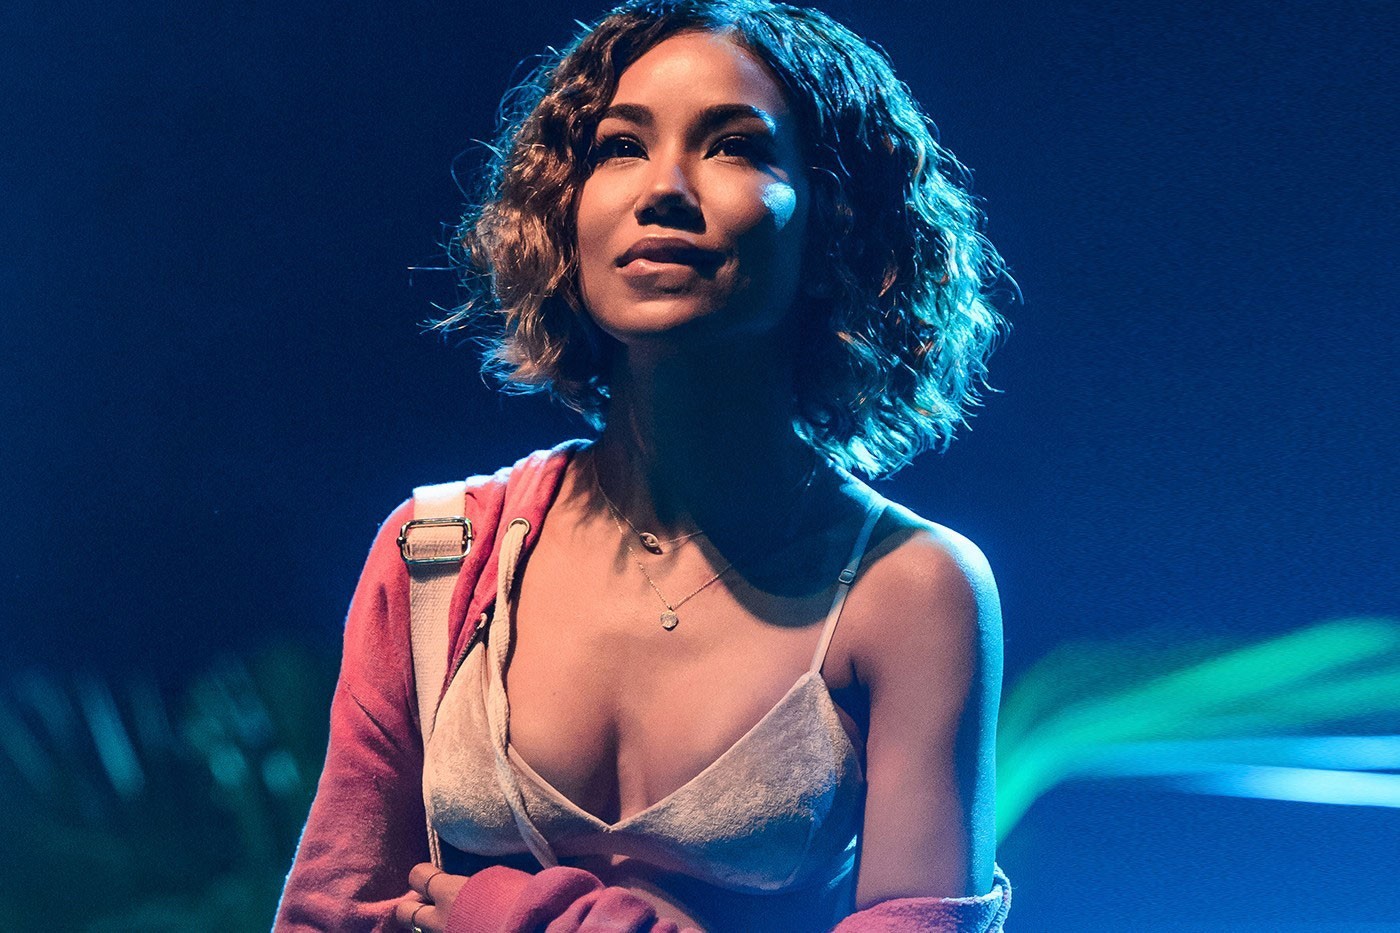 Watch Jhené Aiko's 'Lead the Way' Music Video